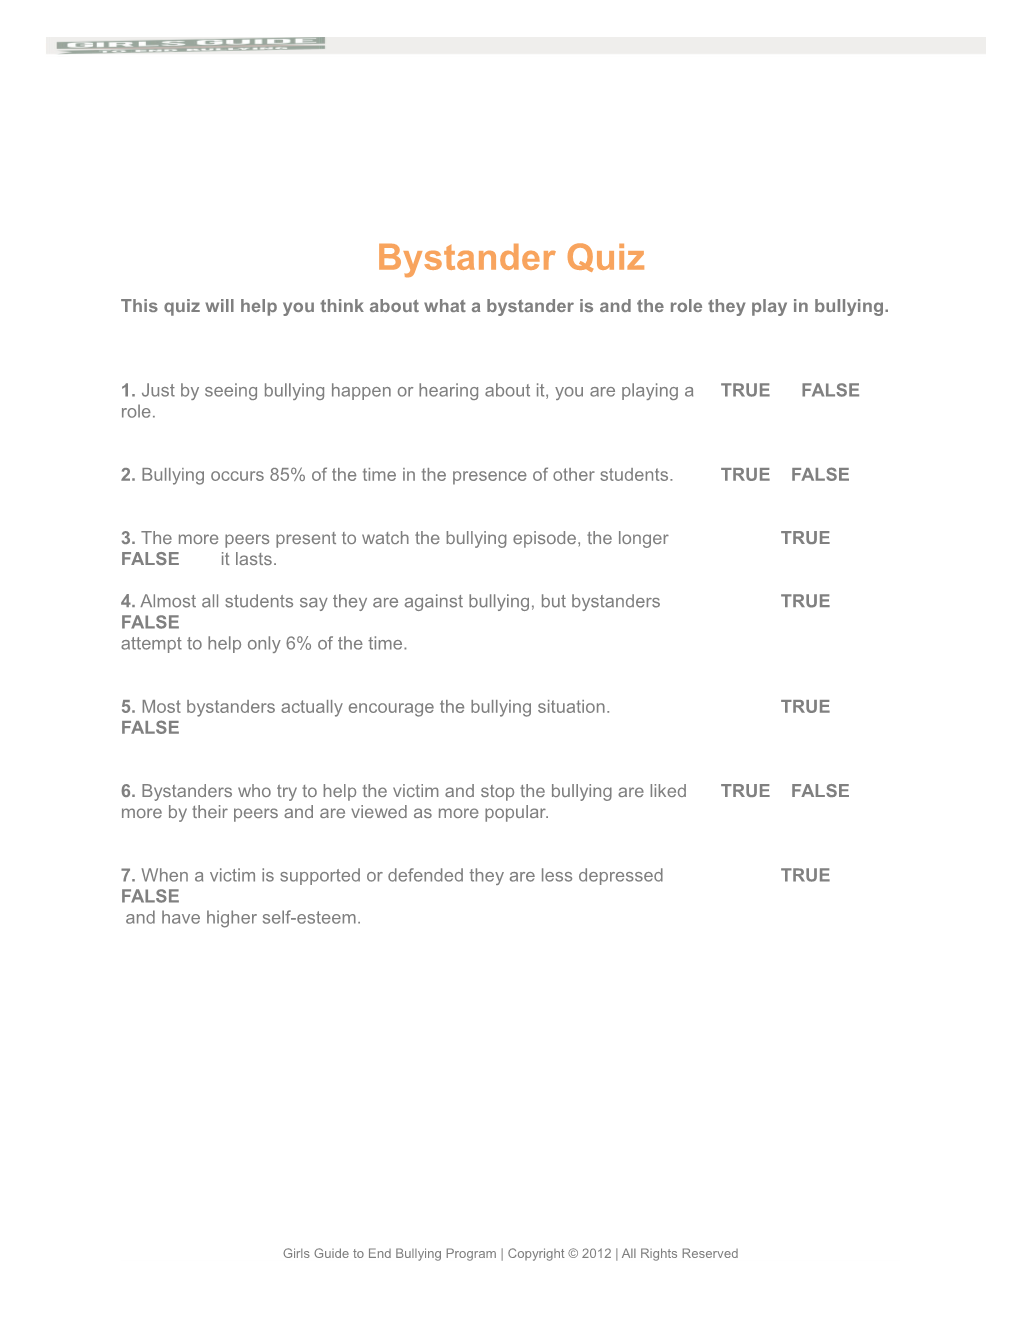 This Quiz Will Help You Think About What a Bystander Is and the Role They Play in Bullying